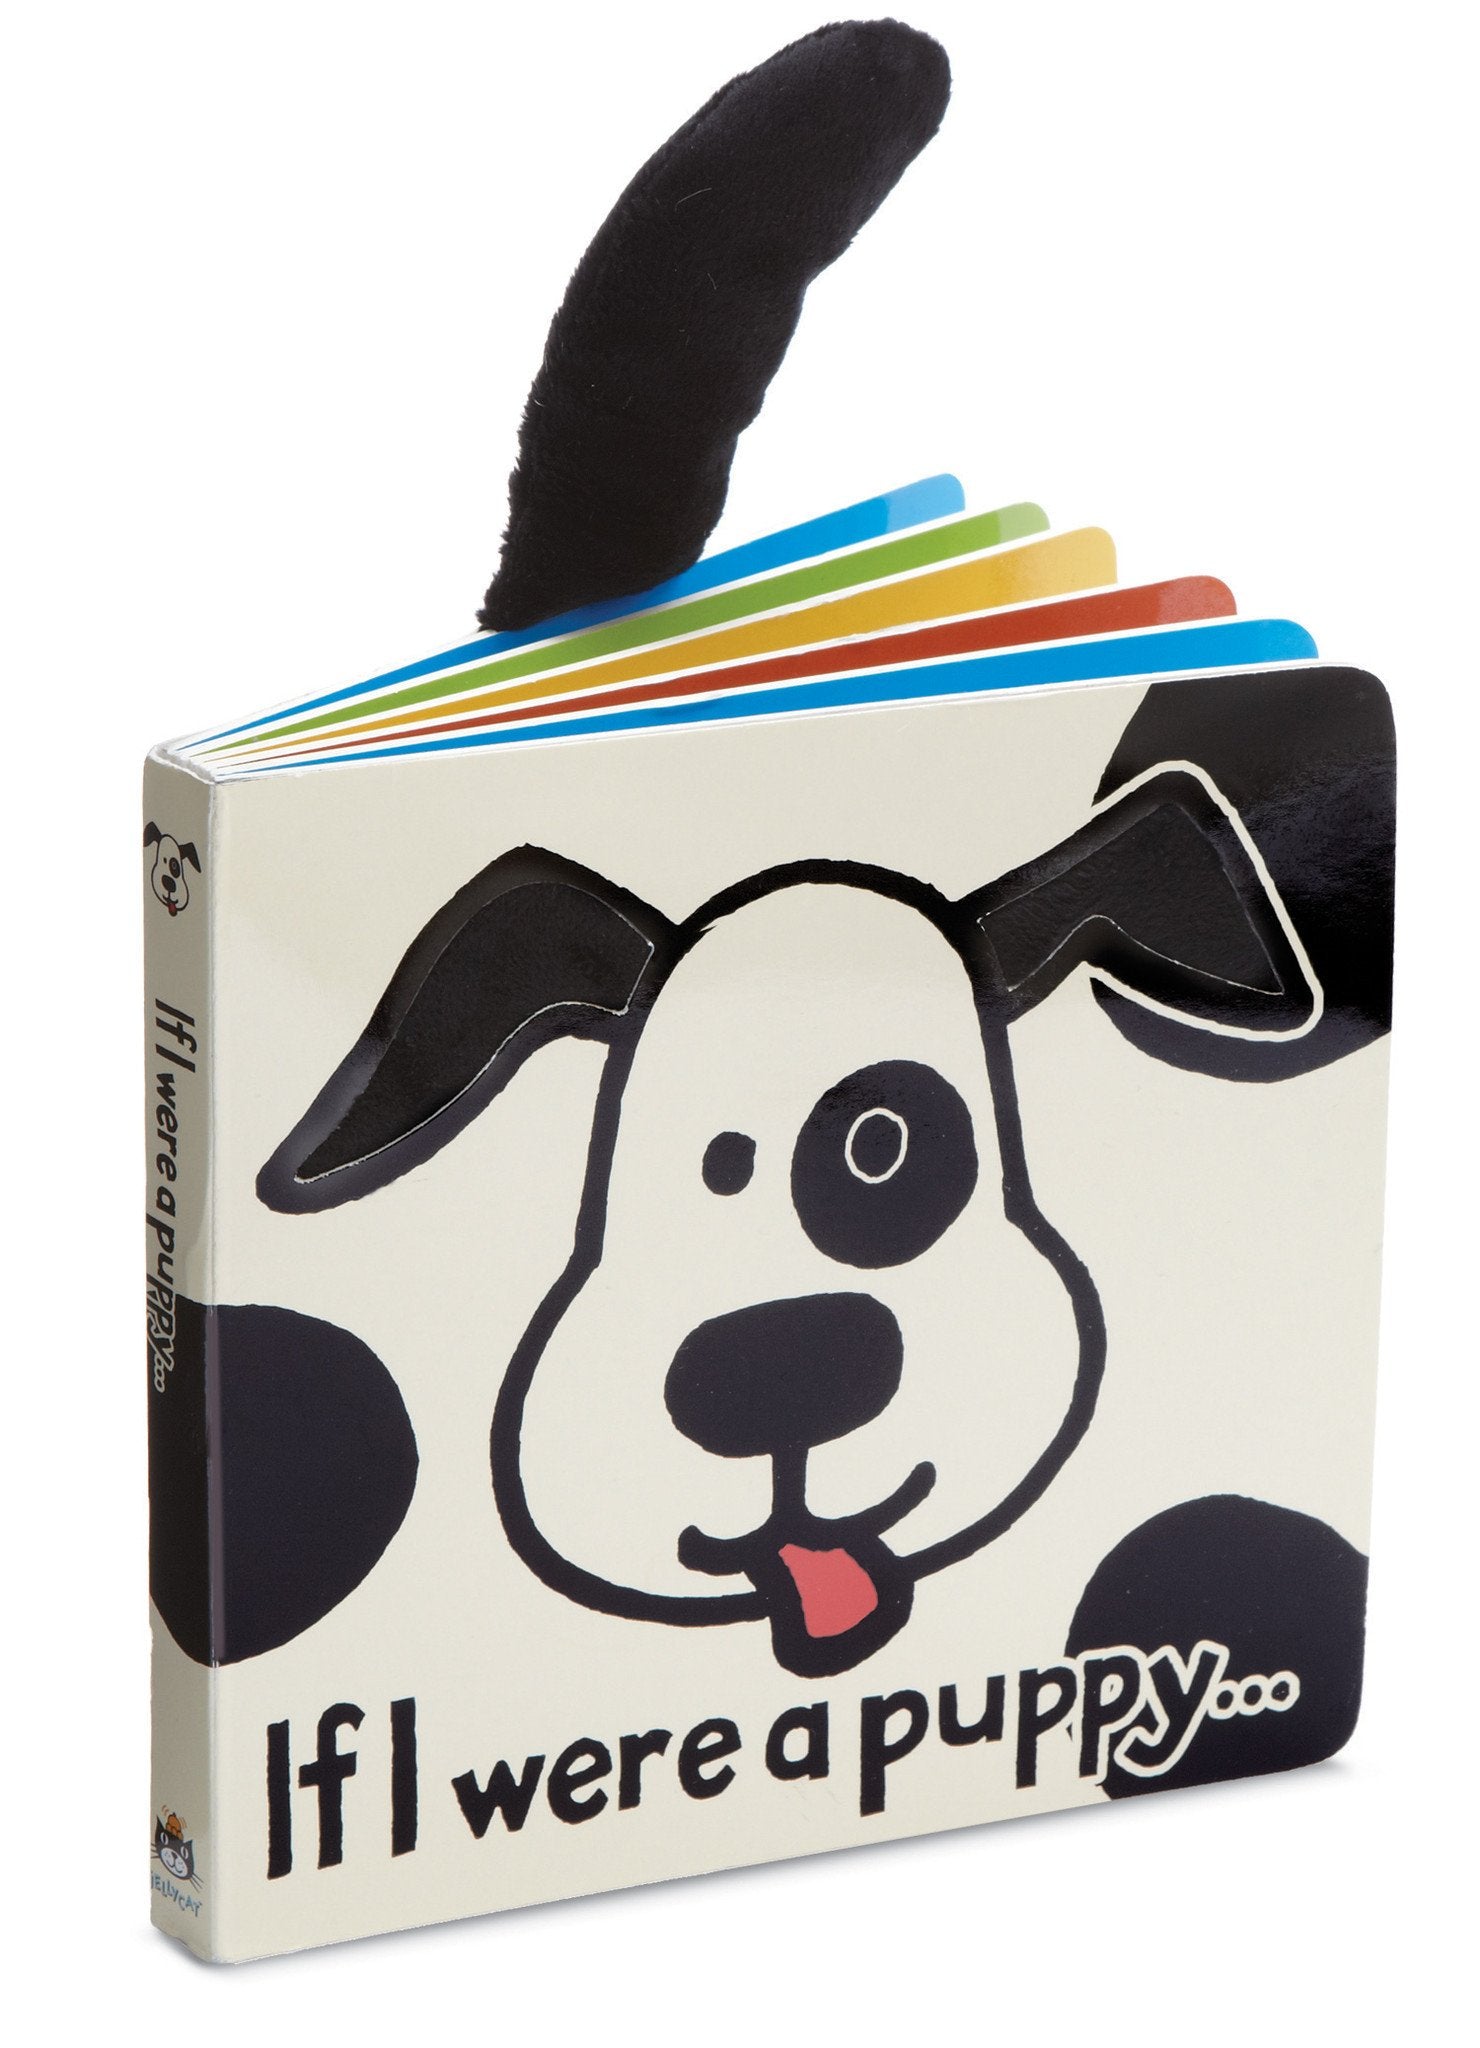 if i were a puppy board book on a white background